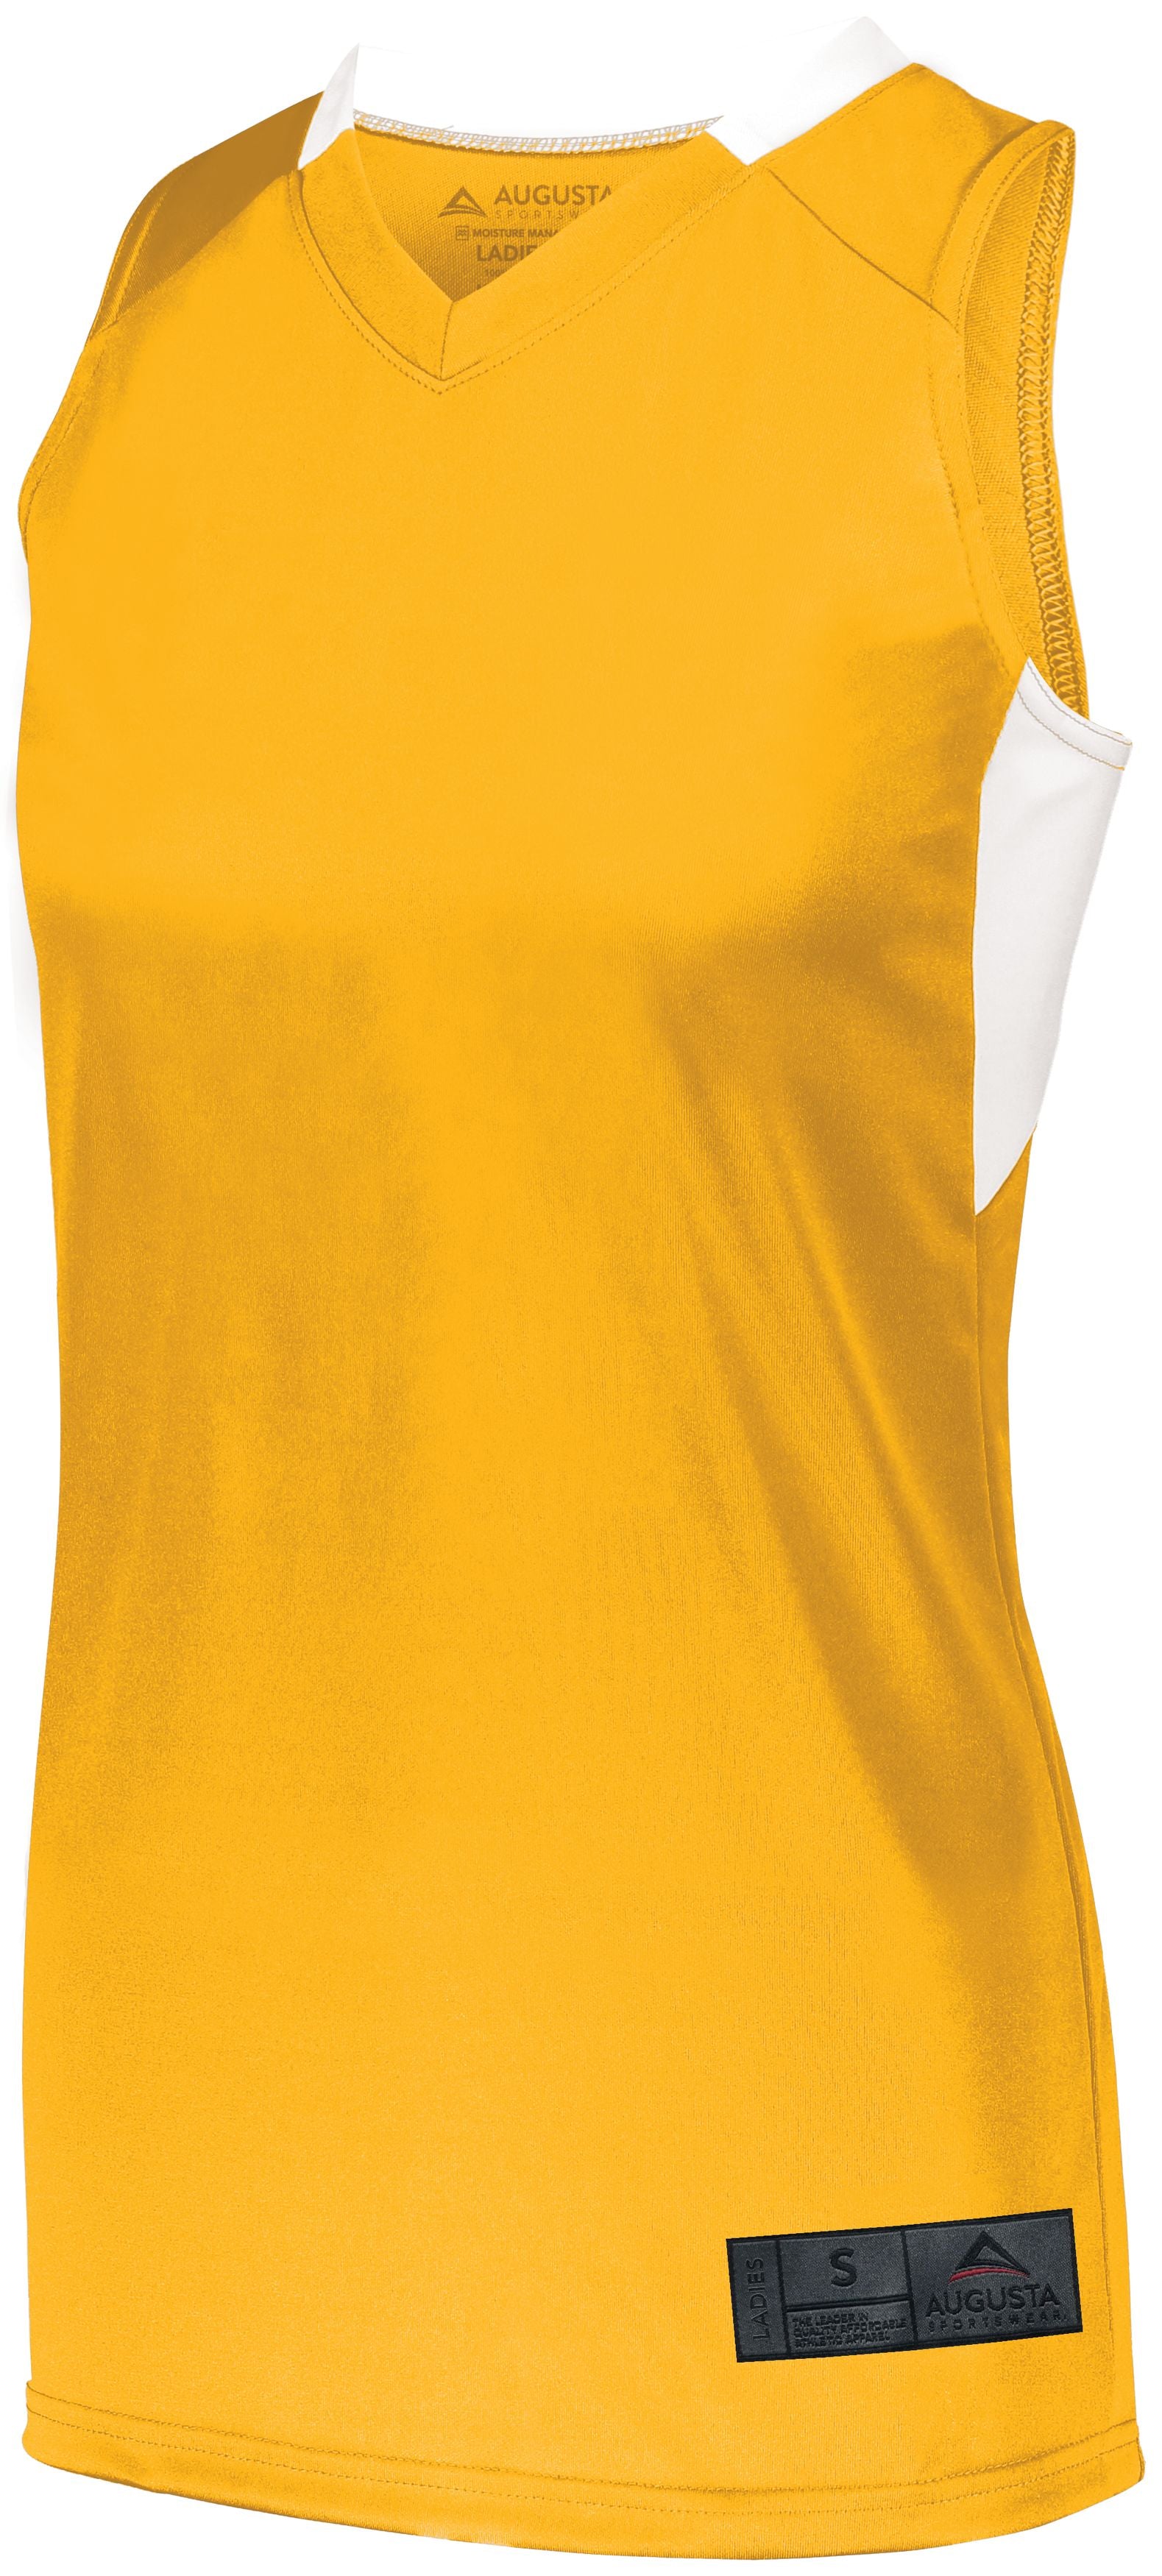 Augusta Sportswear Ladies Step-Back Basketball Jersey in Gold/White  -Part of the Ladies, Ladies-Jersey, Augusta-Products, Basketball, Shirts, All-Sports, All-Sports-1 product lines at KanaleyCreations.com